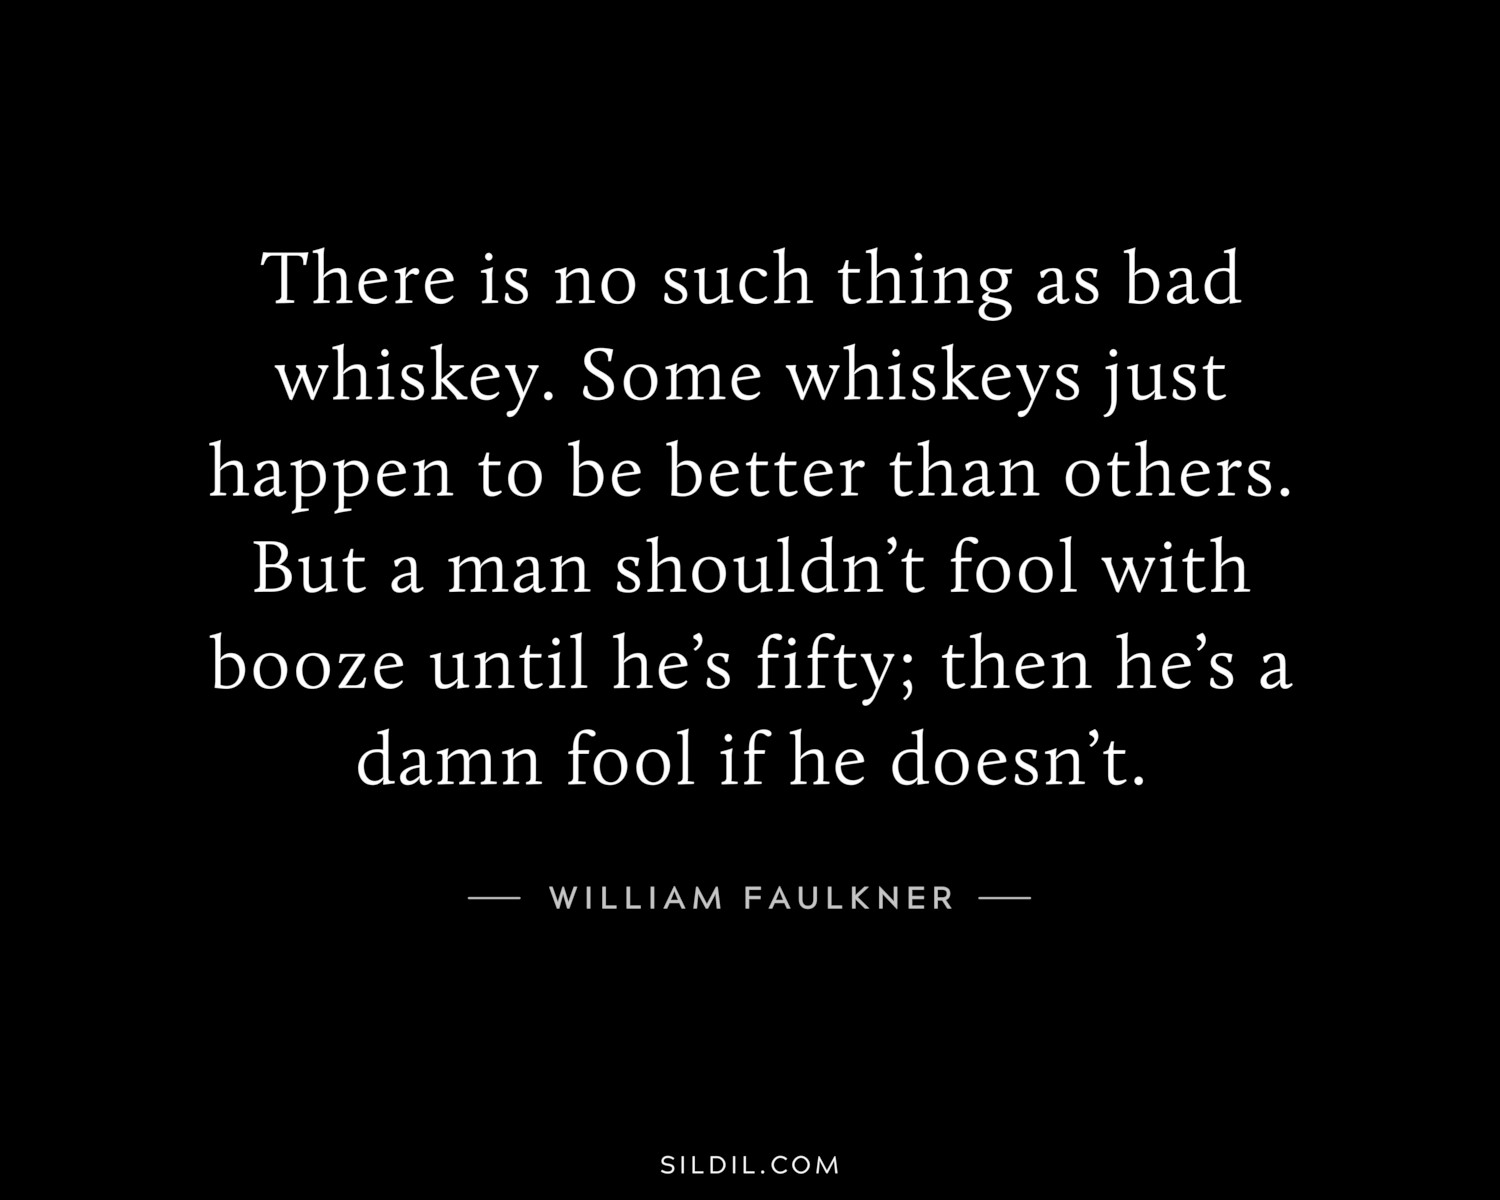 There is no such thing as bad whiskey. Some whiskeys just happen to be better than others. But a man shouldn’t fool with booze until he’s fifty; then he’s a damn fool if he doesn’t.